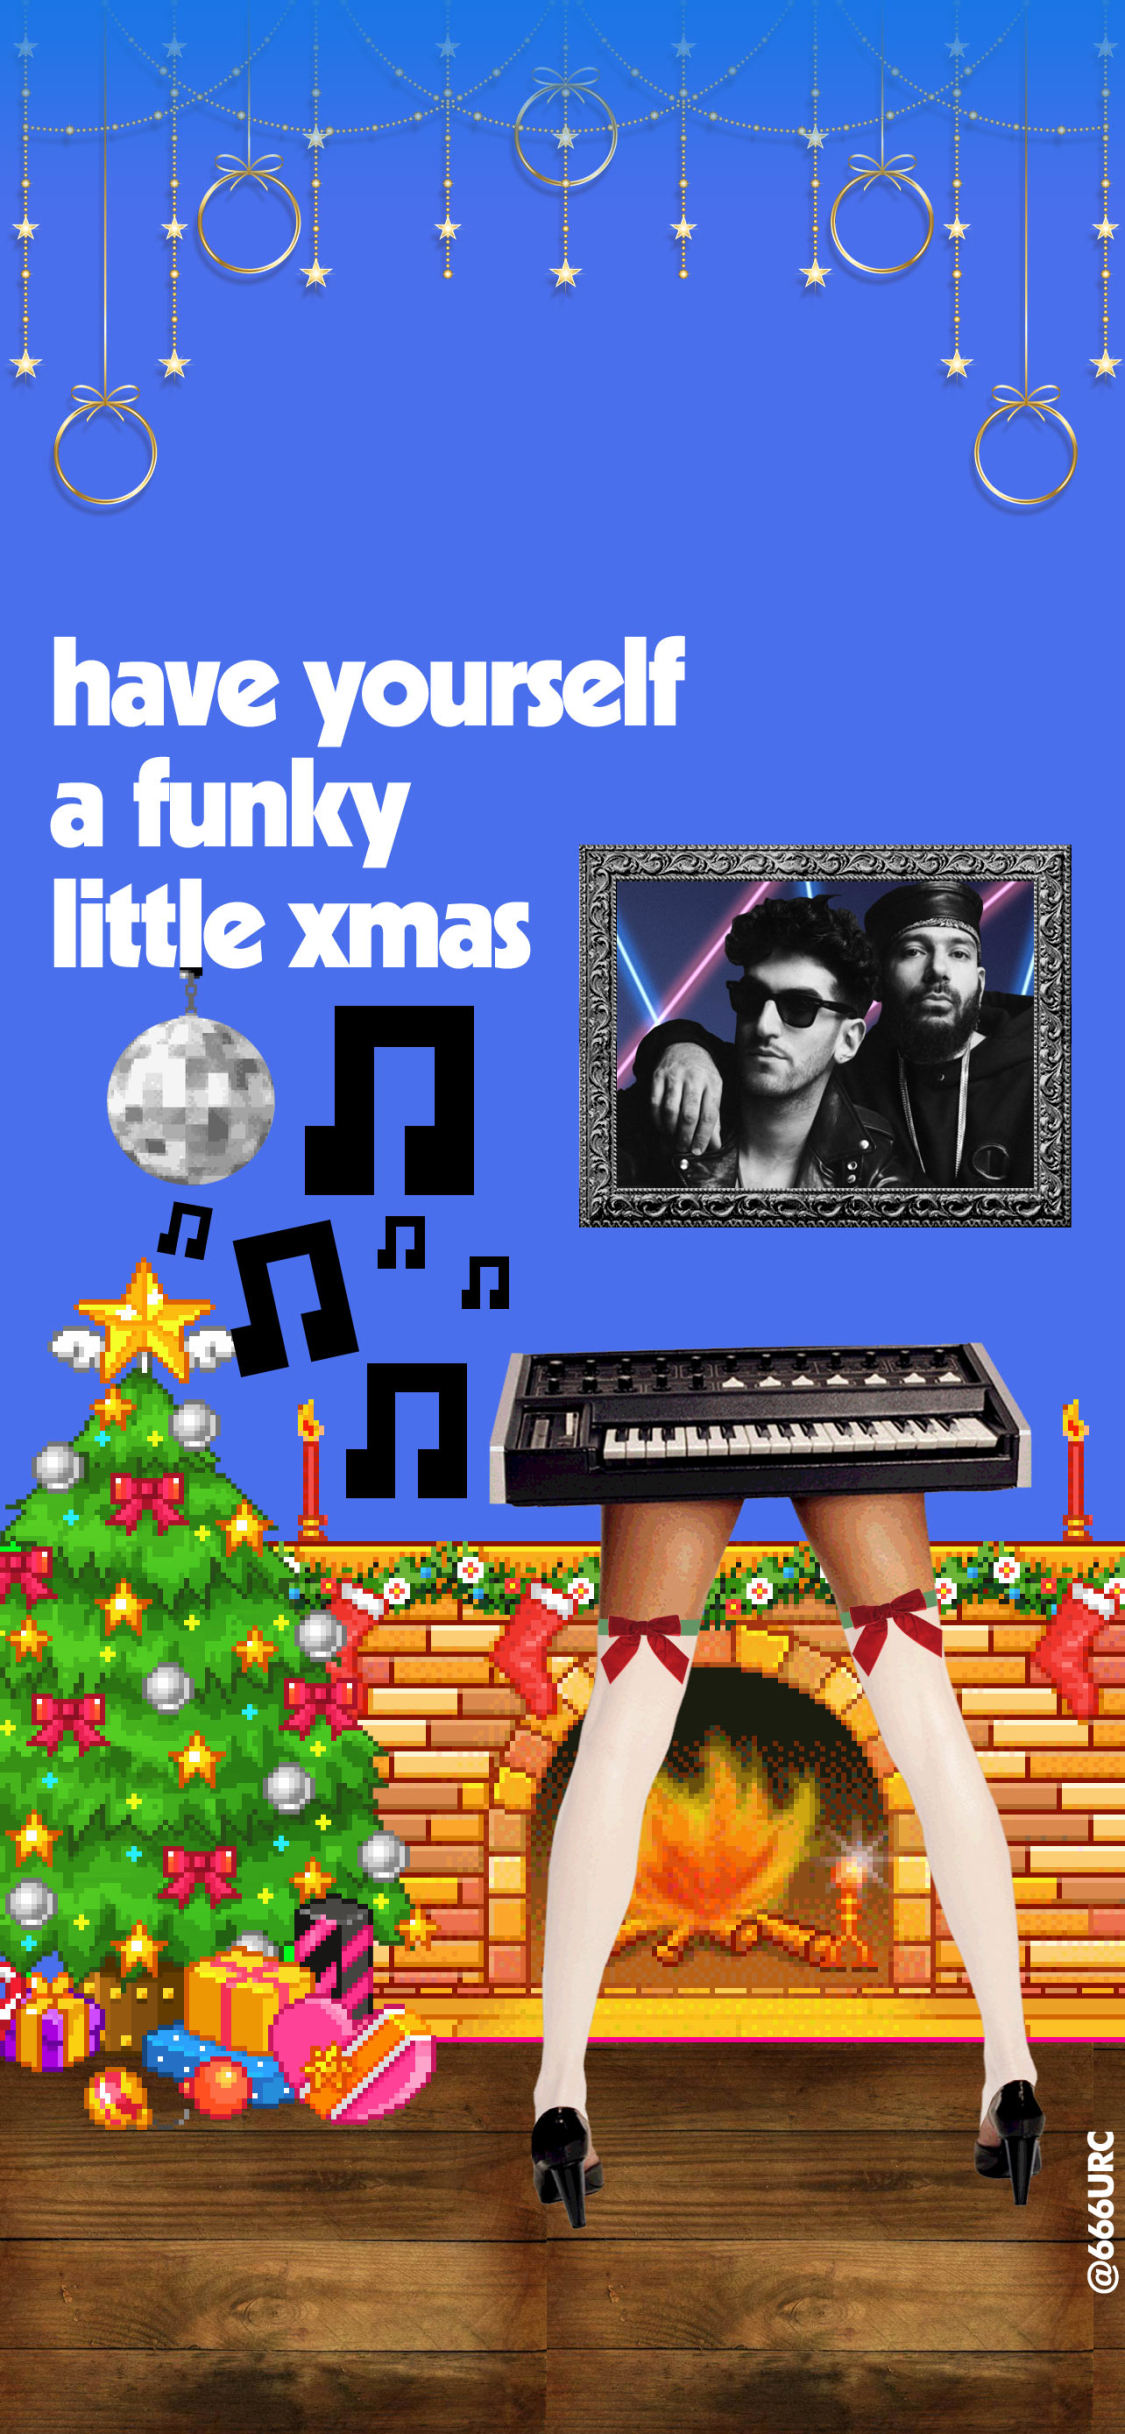 phone wallpaper displaying chromeo // have yourself a funky little xmas